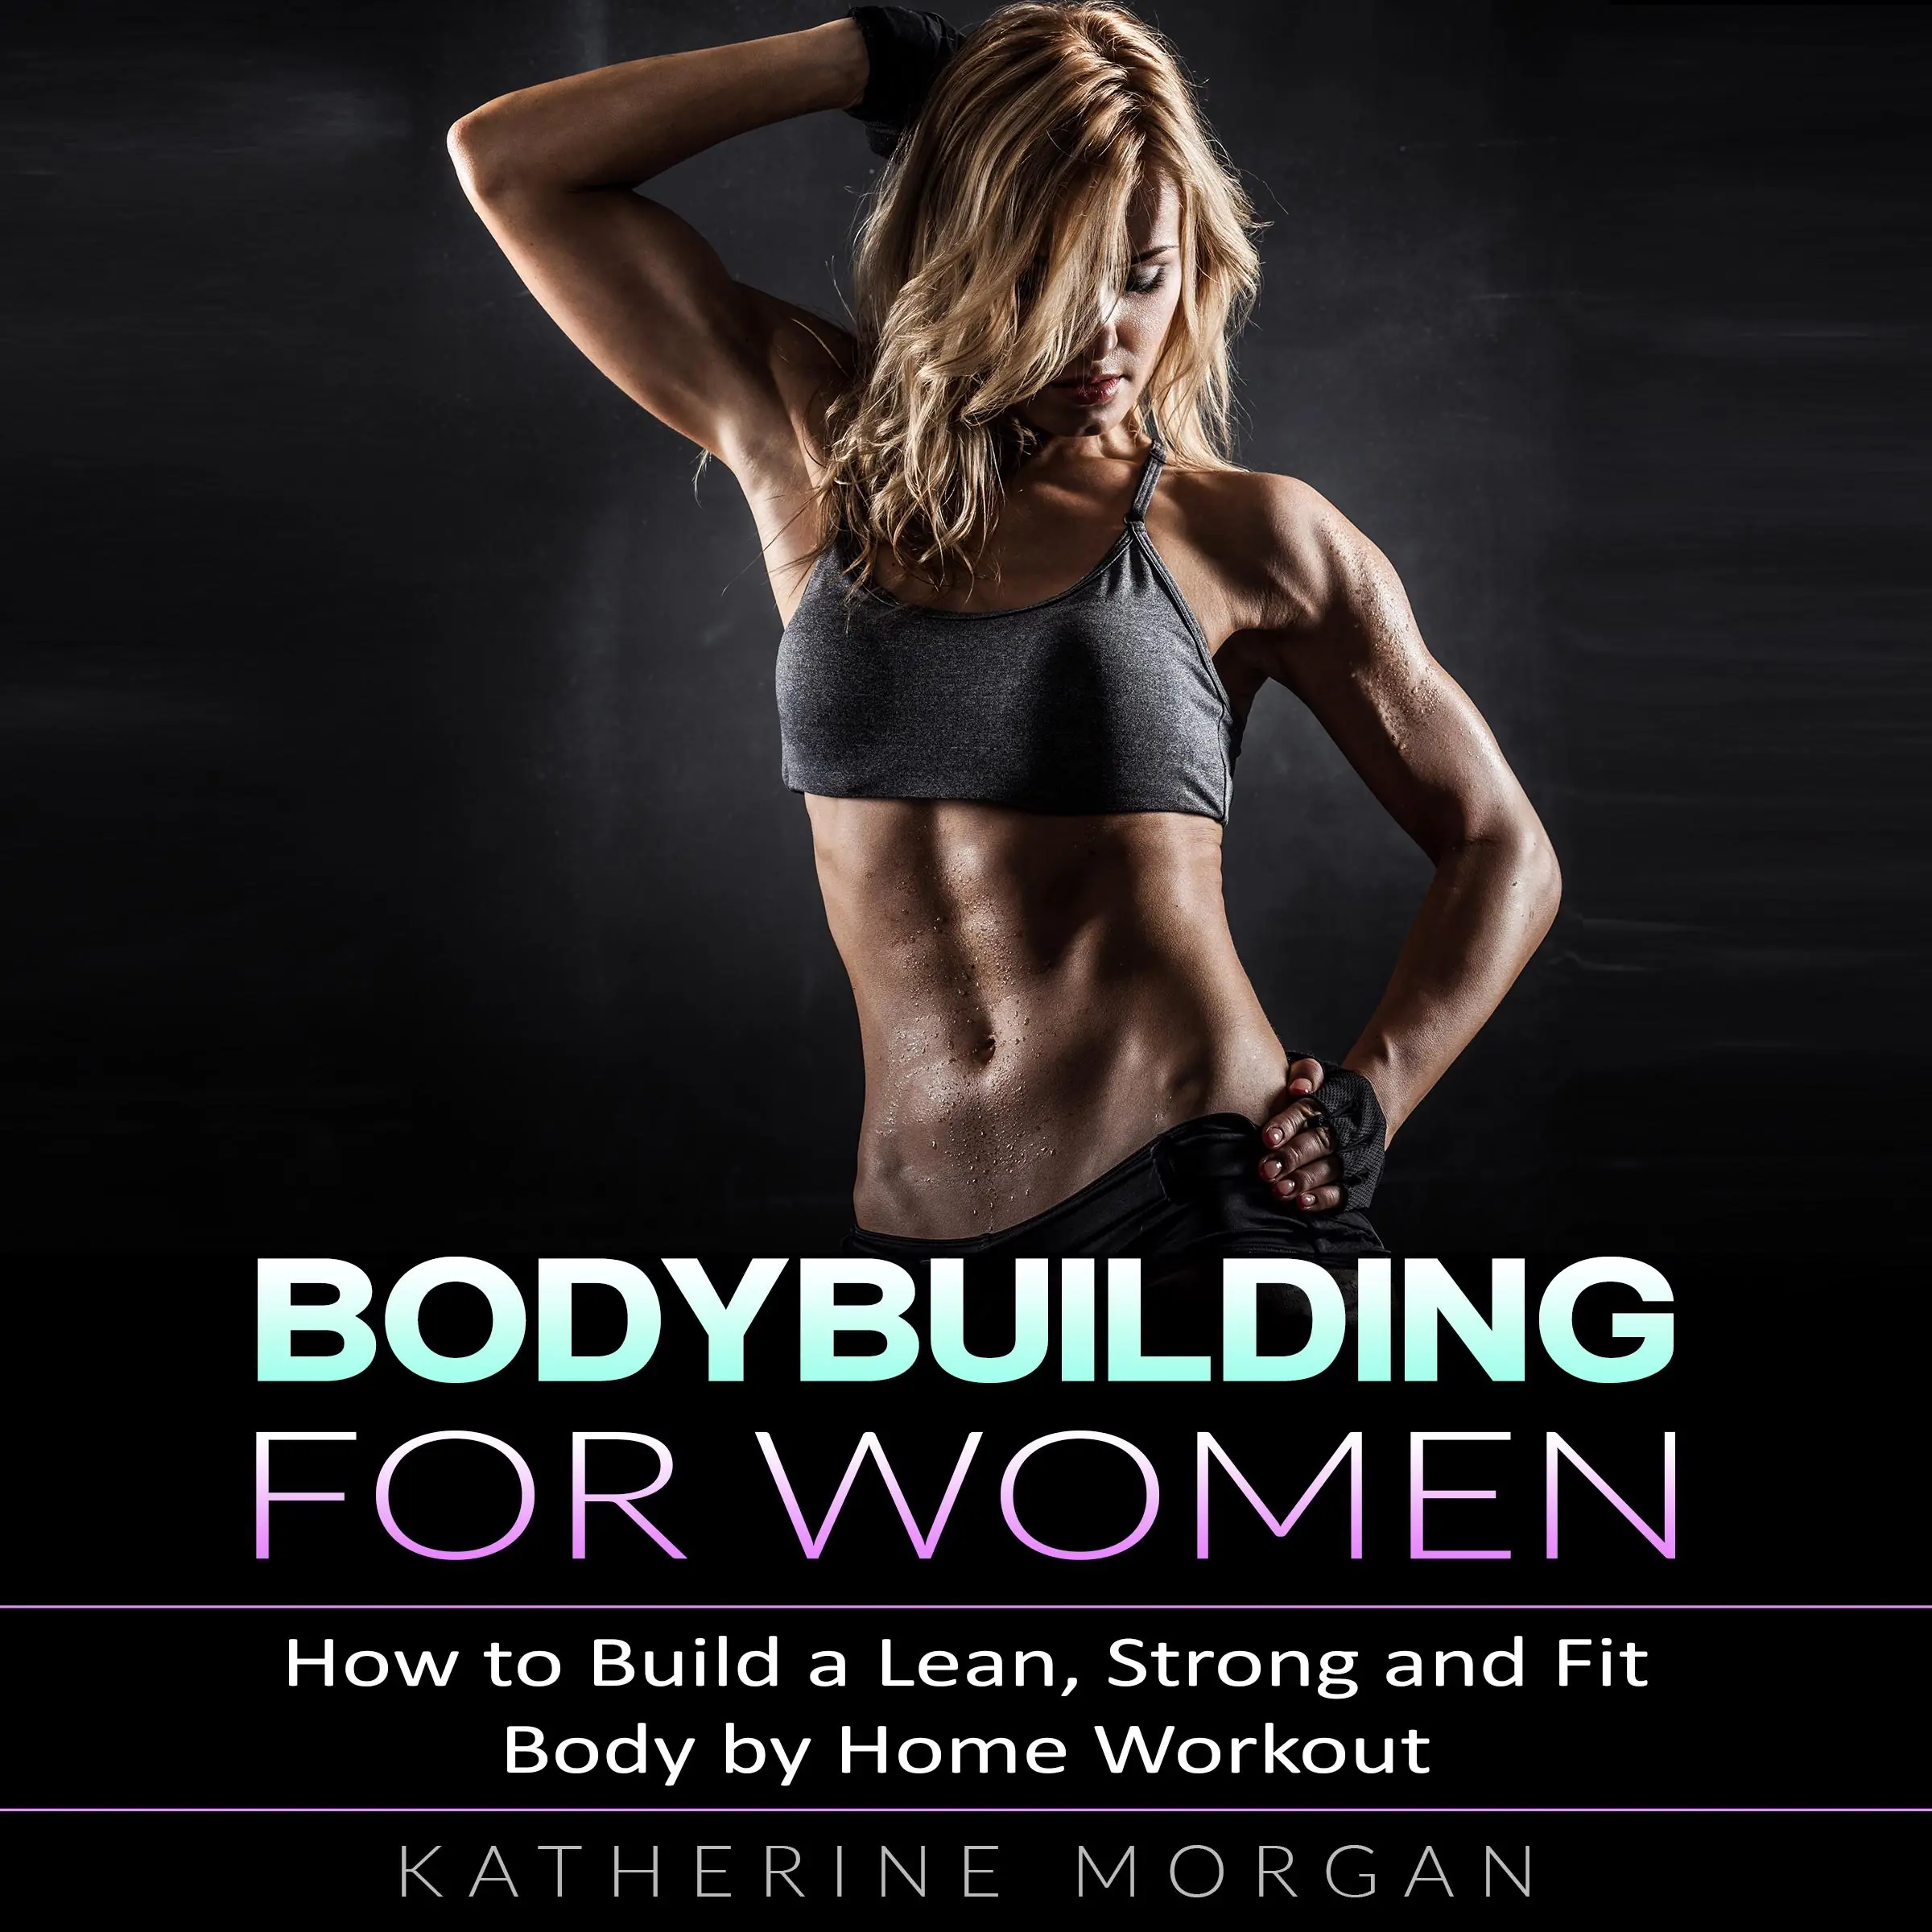 Bodybuilding for Women: How to Build a Lean, Strong and Fit Body by Home Workout by Katherine Morgan Audiobook